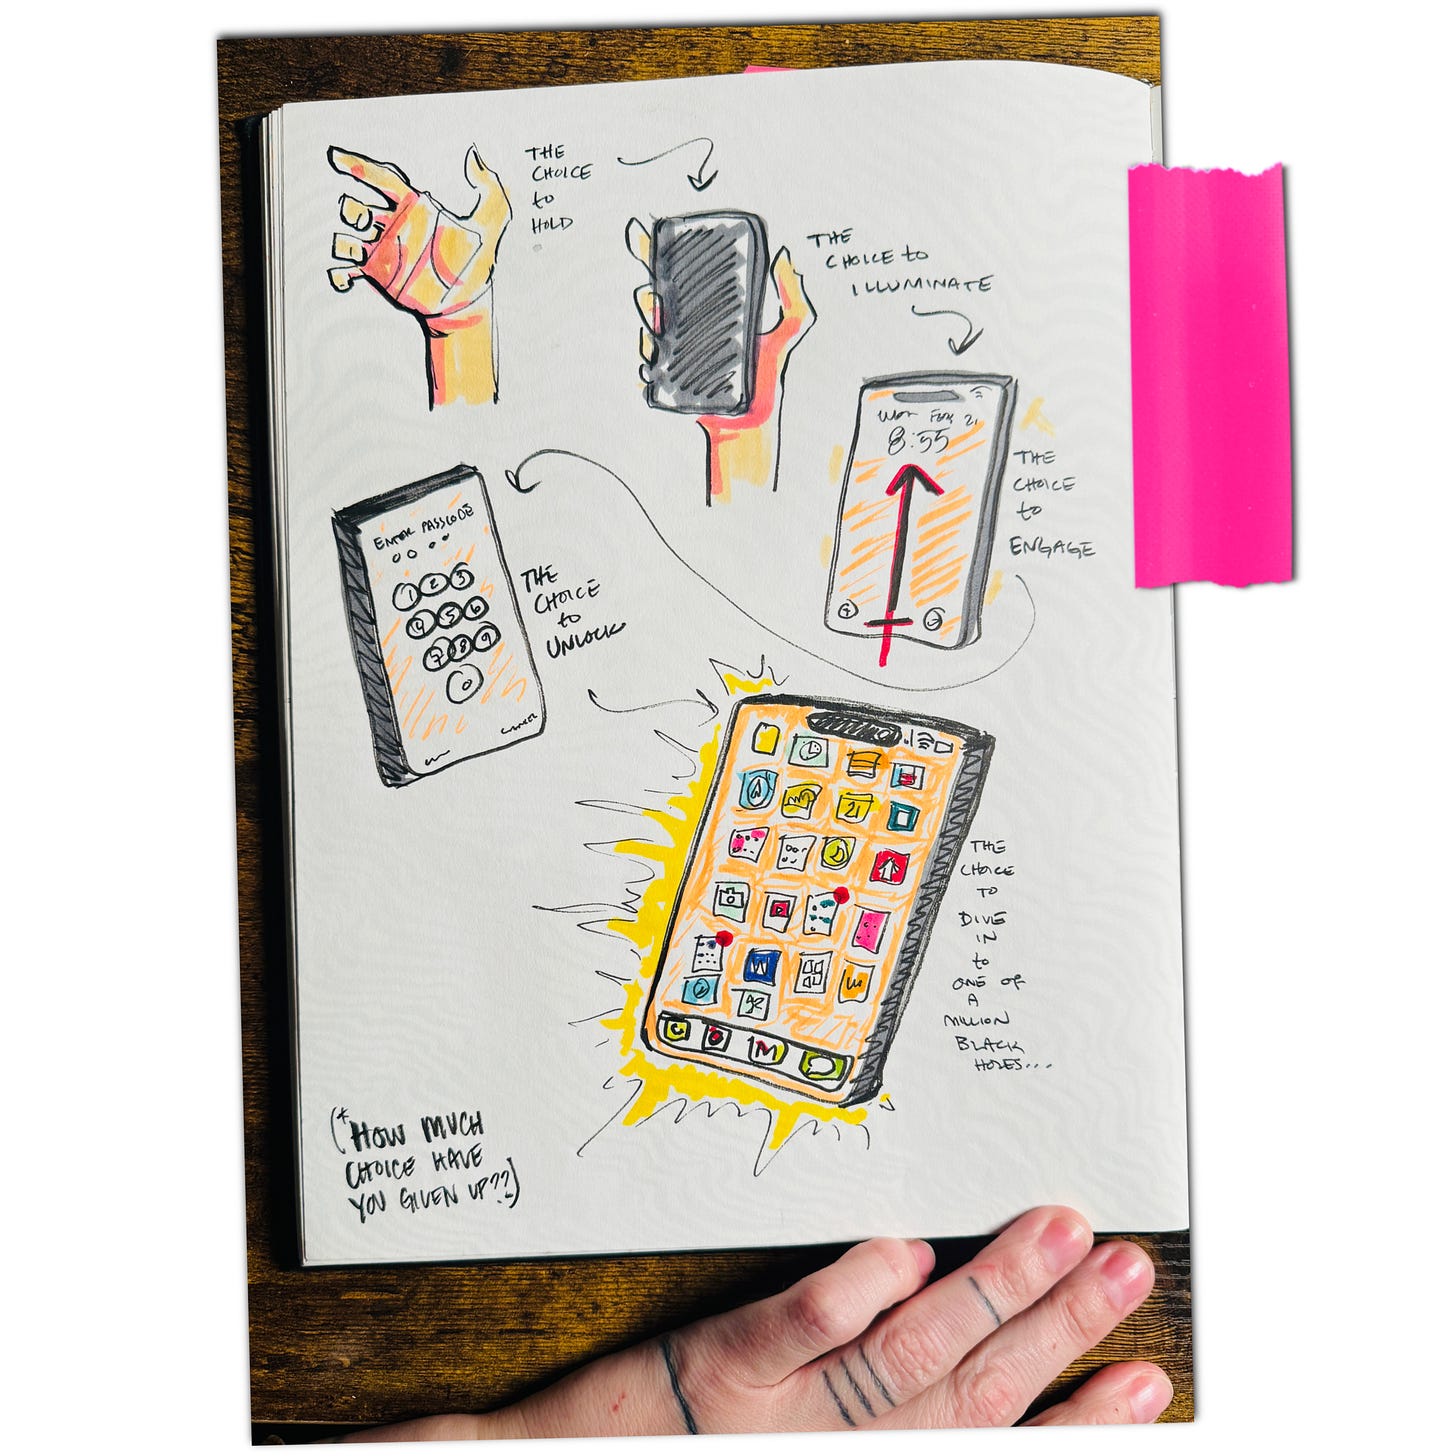 Lisette Murphy's sketchbook is open to a page with a sequence of drawings showing a hand going through the stages of waking up and unlocking an iPhone.  Lisette writes each step as a choice, “the choice to hold, the choice to unlock, the choice to engage, the choice to dive in to one of a million black holes” then asks, “how much choice have you given up??”